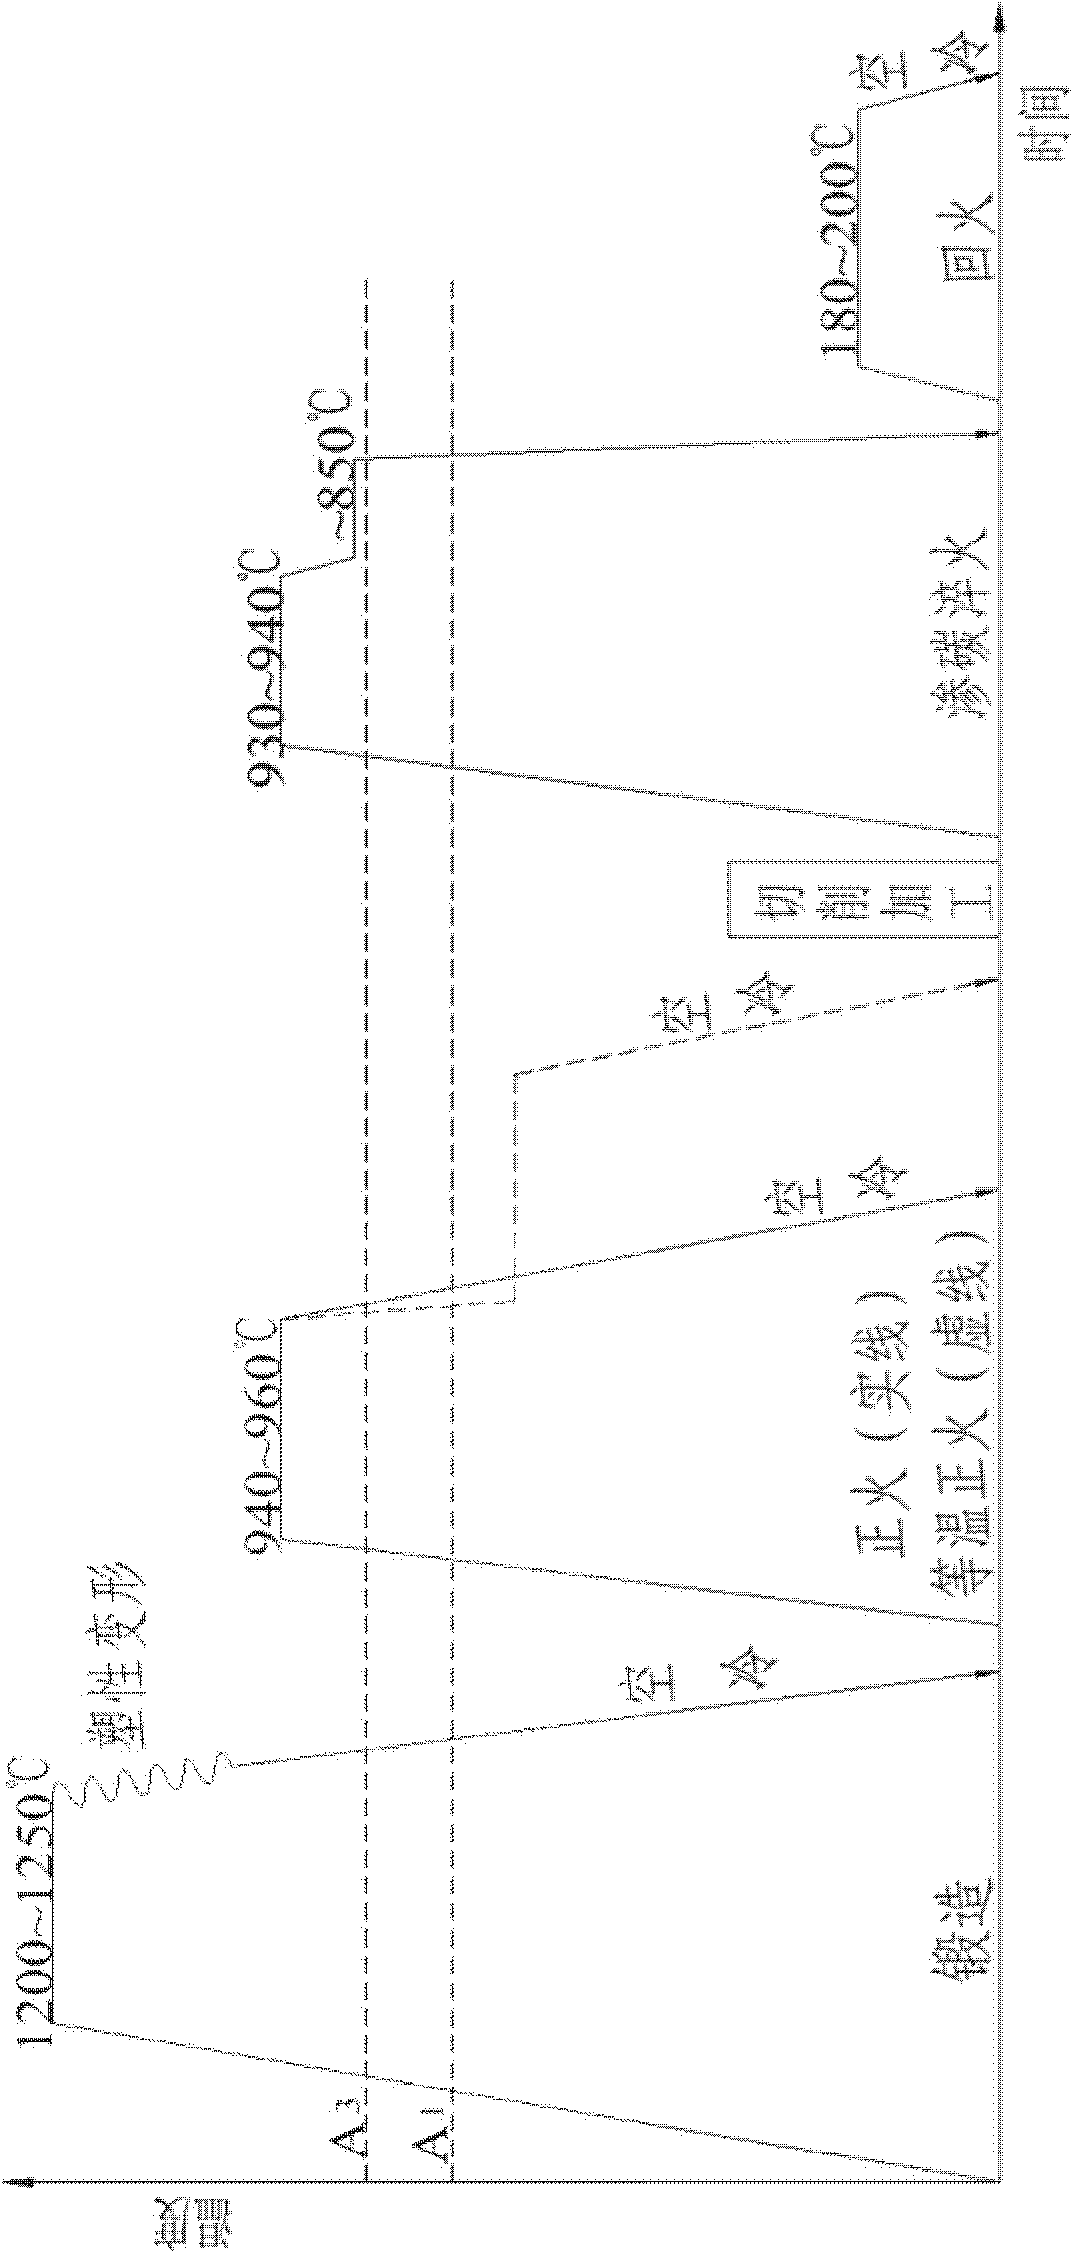 Forging waste heat isothermal normalizing device and method